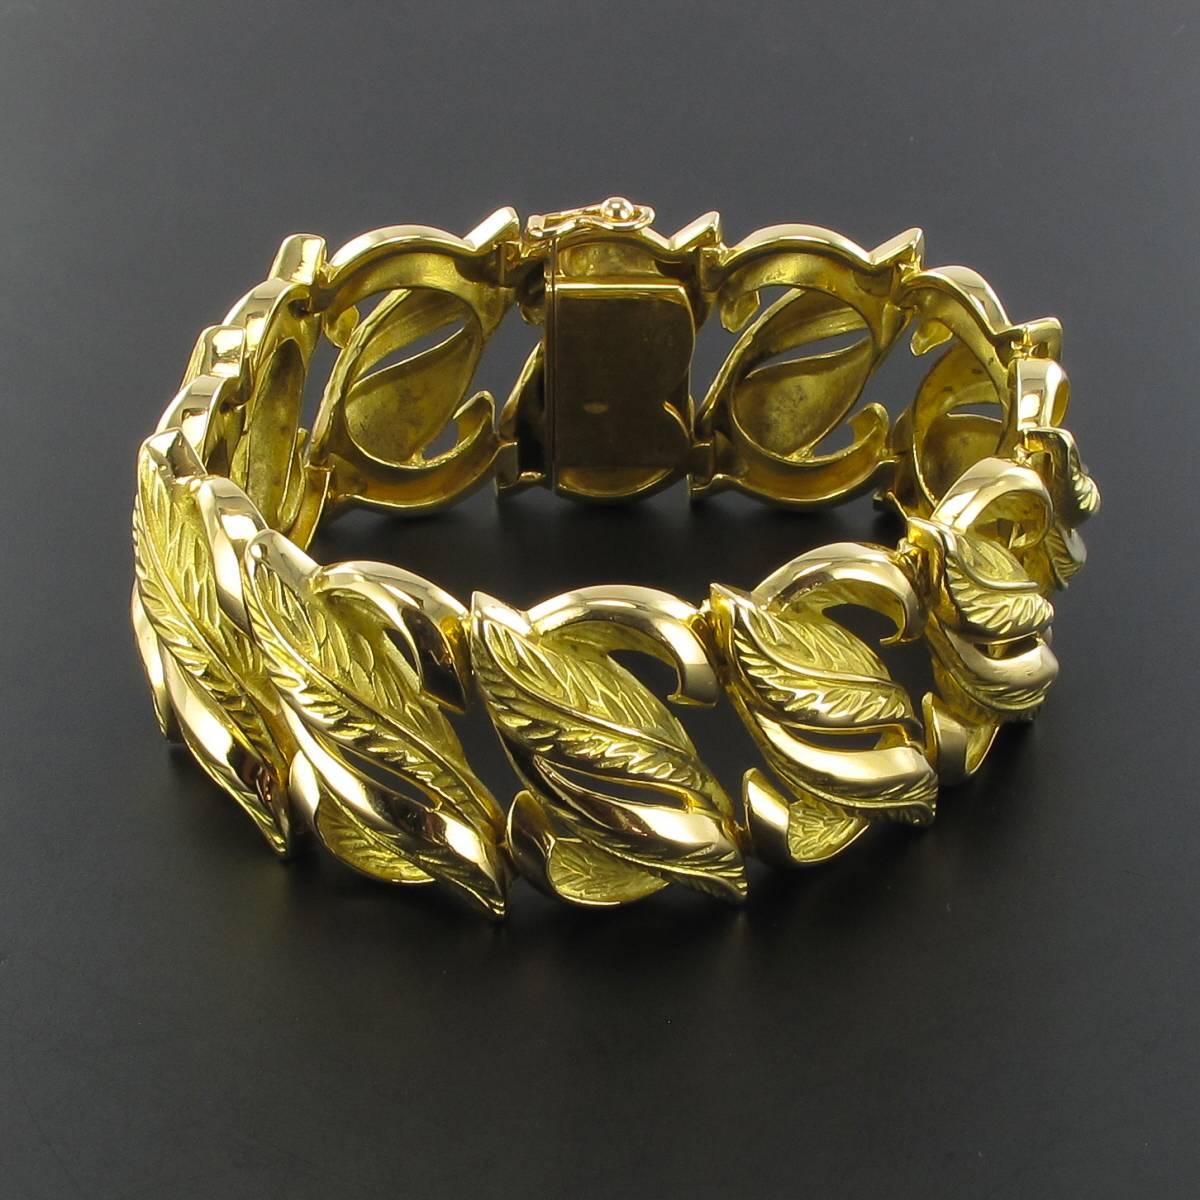 18 karat yellow gold bracelet, rhino and eagle heads hallmarks. 
This wide articulated bracelet is composed of engraved motifs representing leaves that intertwine. Each motif is joined to each other by hinges that assist with the articulation. It